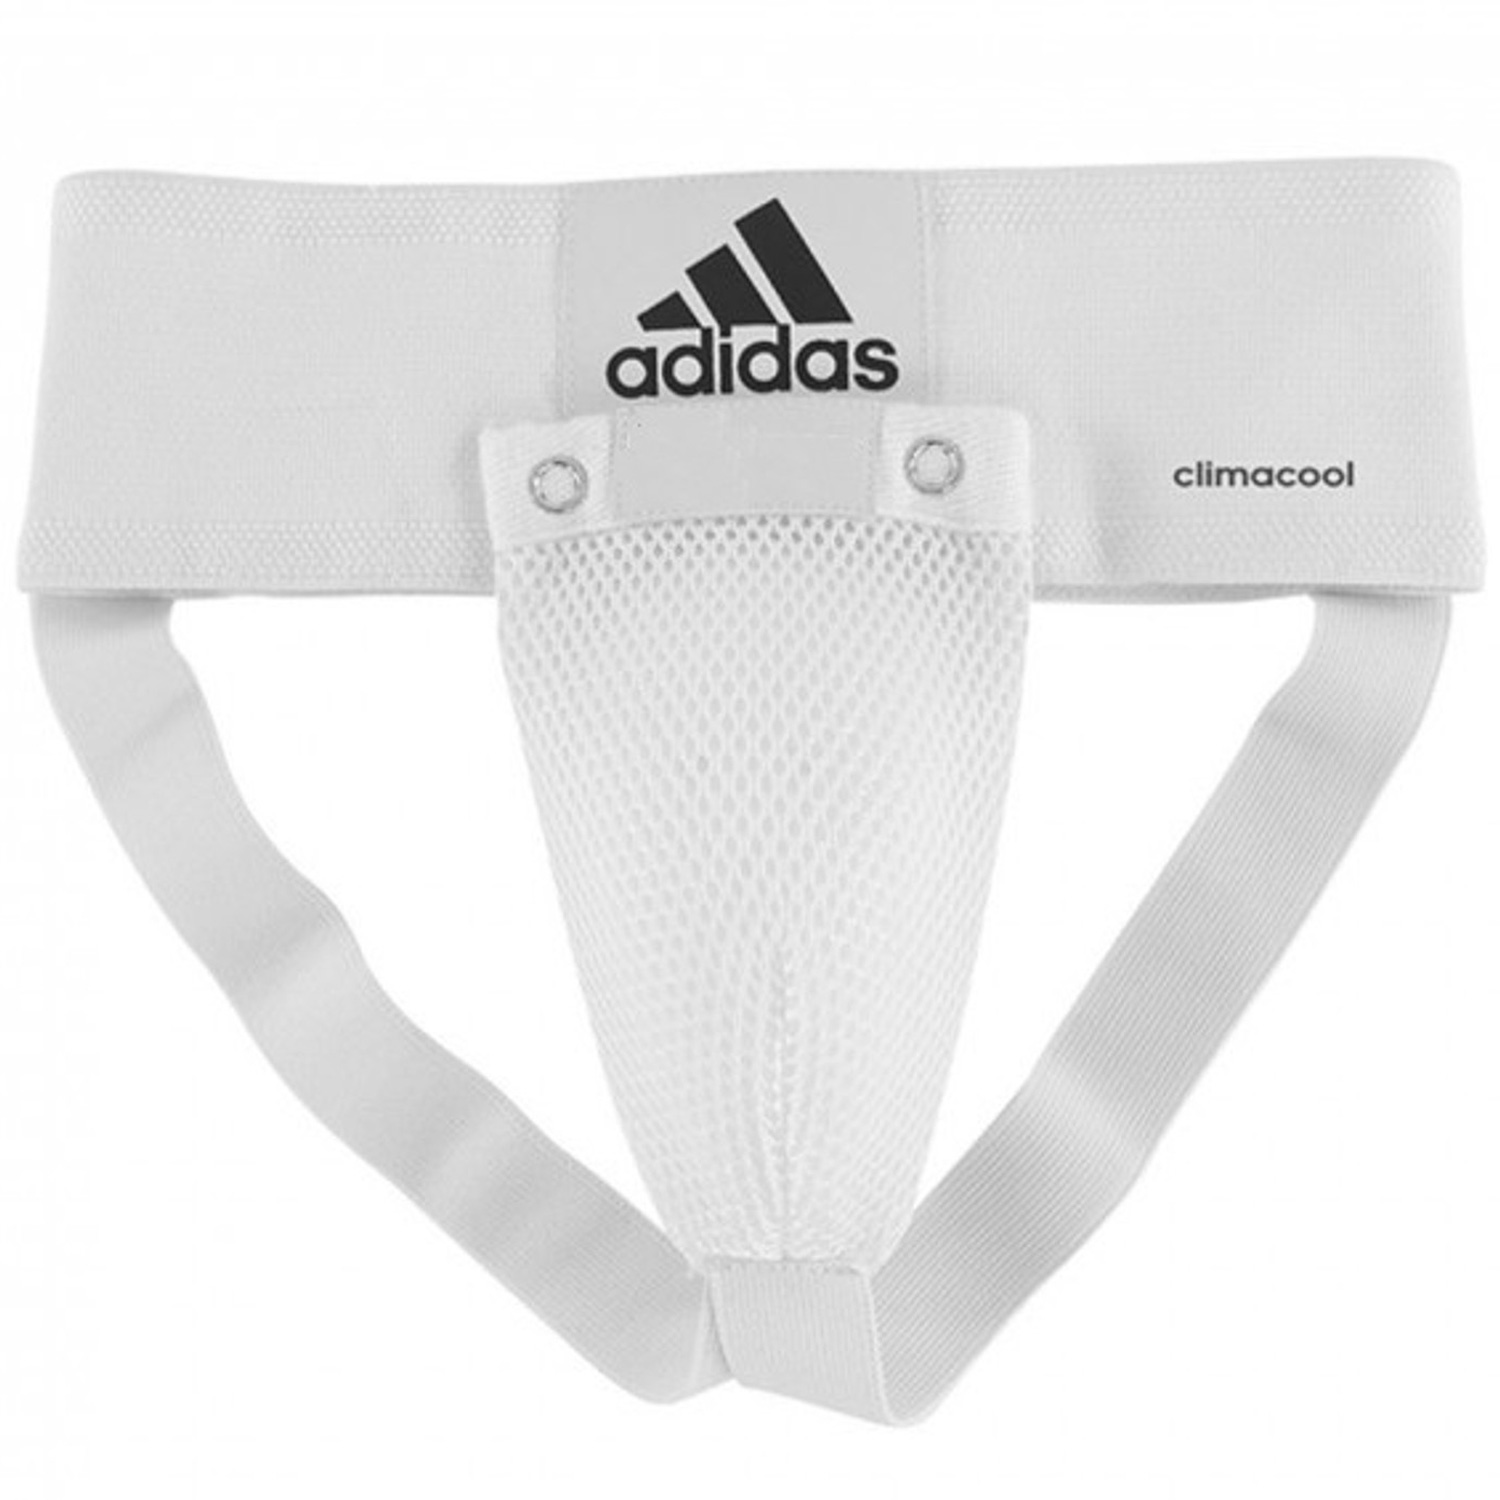 adidas Cup Supporters, white